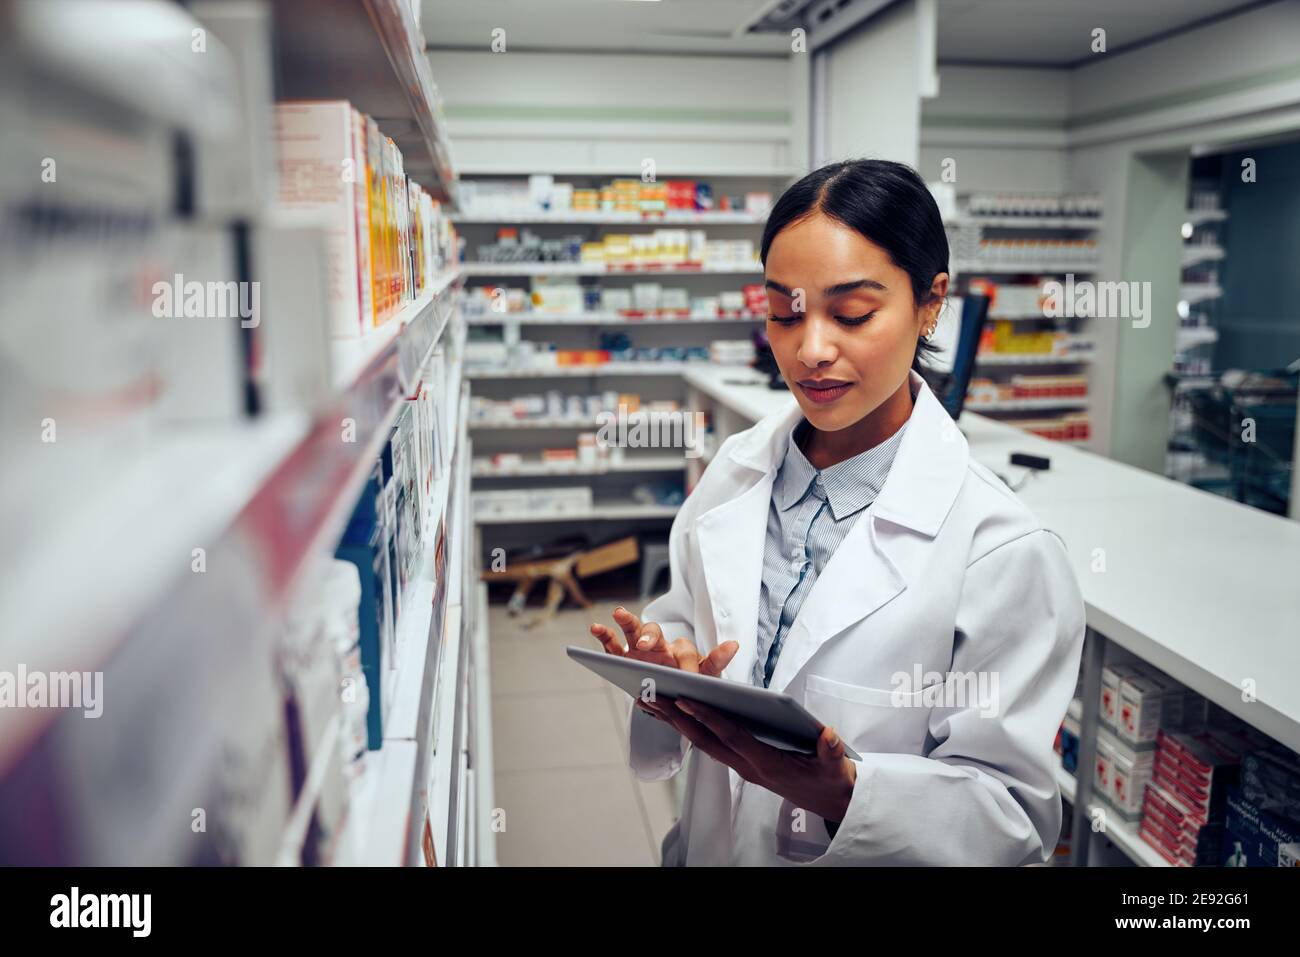 Young female pharmacist checking inventory of medicines in pharmacy using digital tablet wearing labcoat standing behind counter Stock Photo